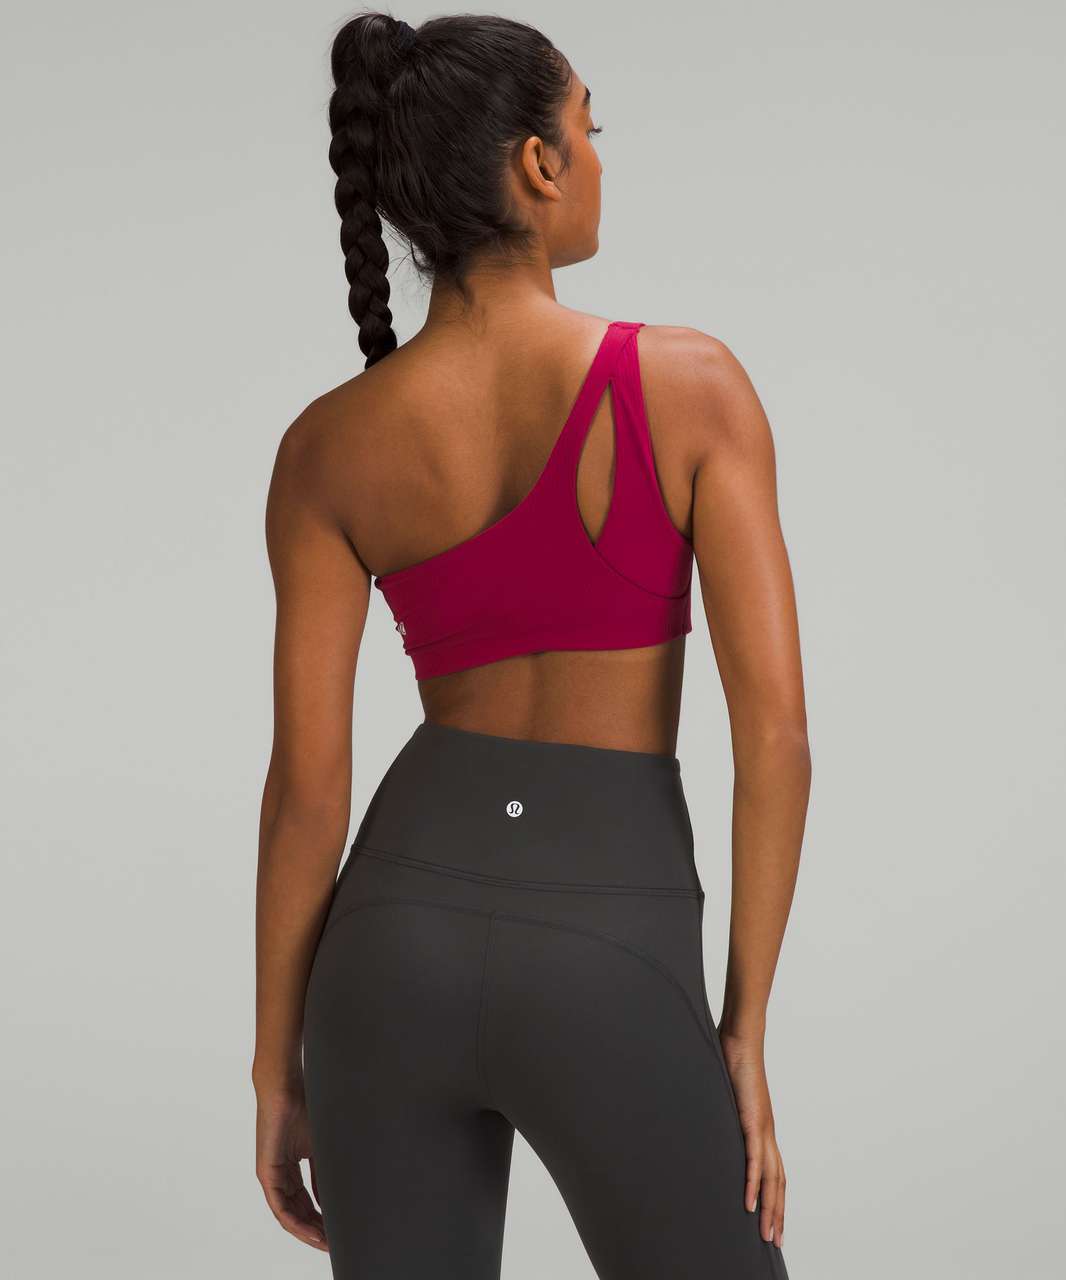 cutest set from wmtm 🙂 nulu front gather yoga bra + 25” aligns in